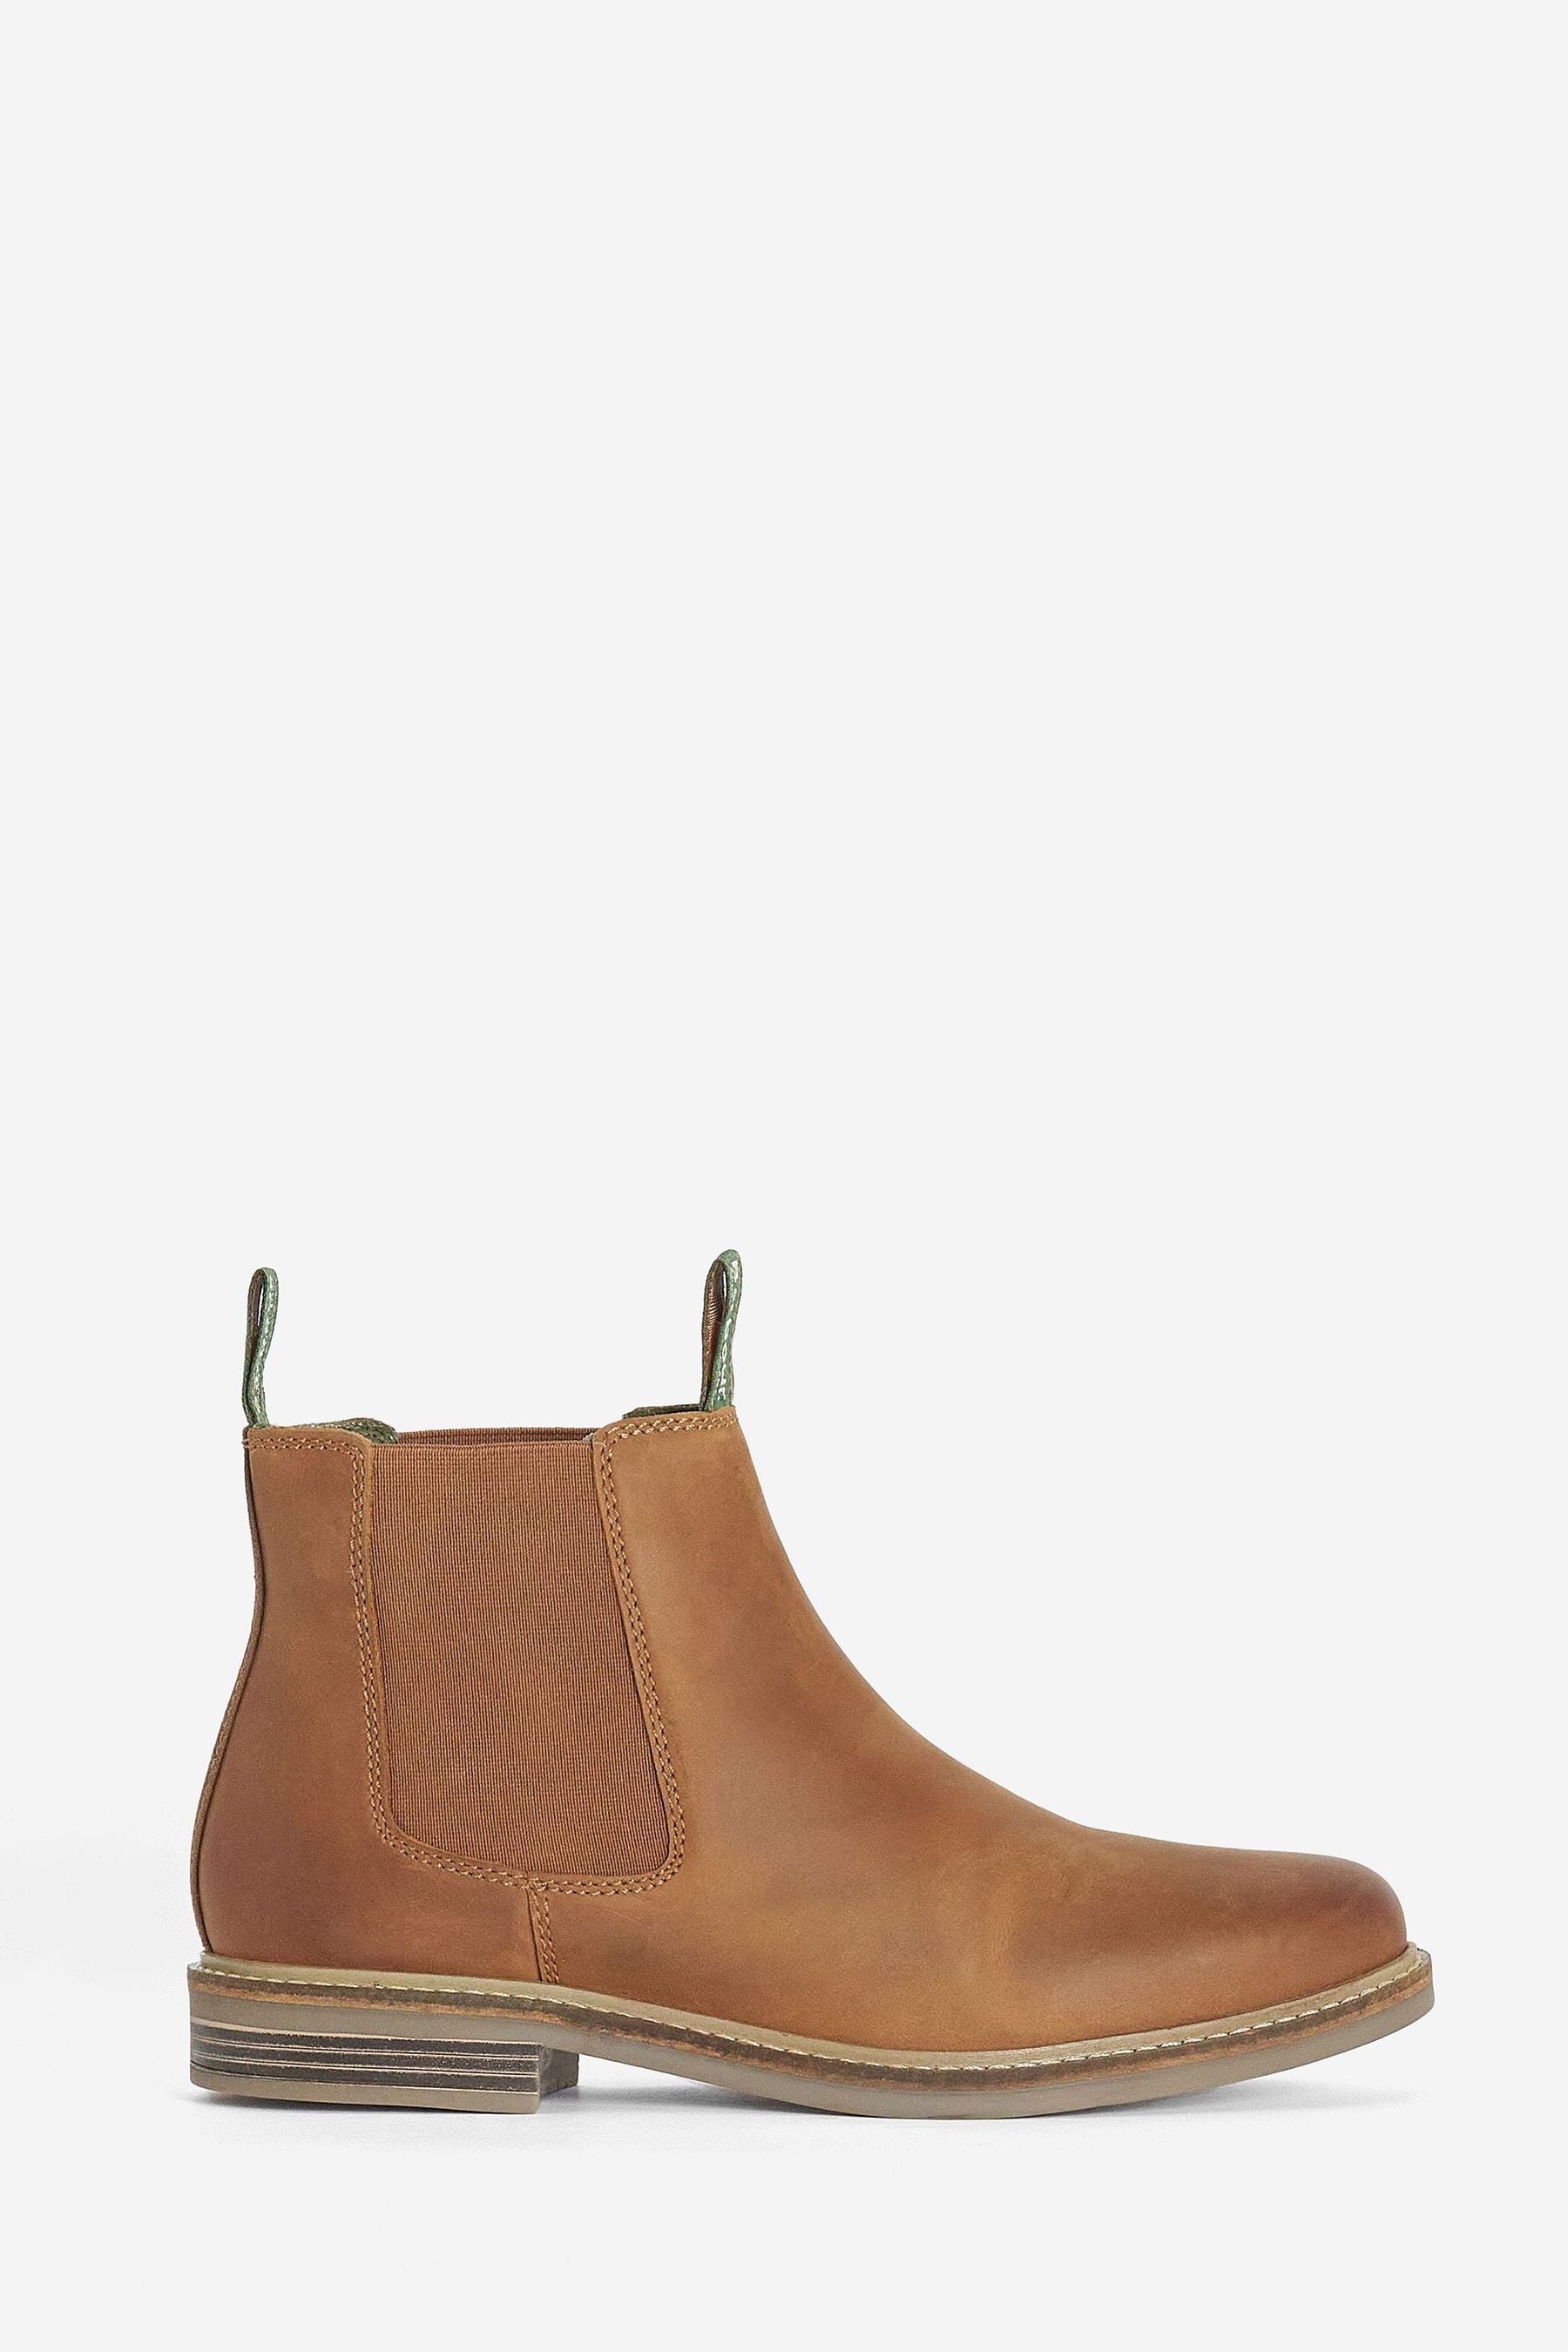 Buy Barbour® Dark Tan Farsley Chelsea Boots from the Next UK online shop